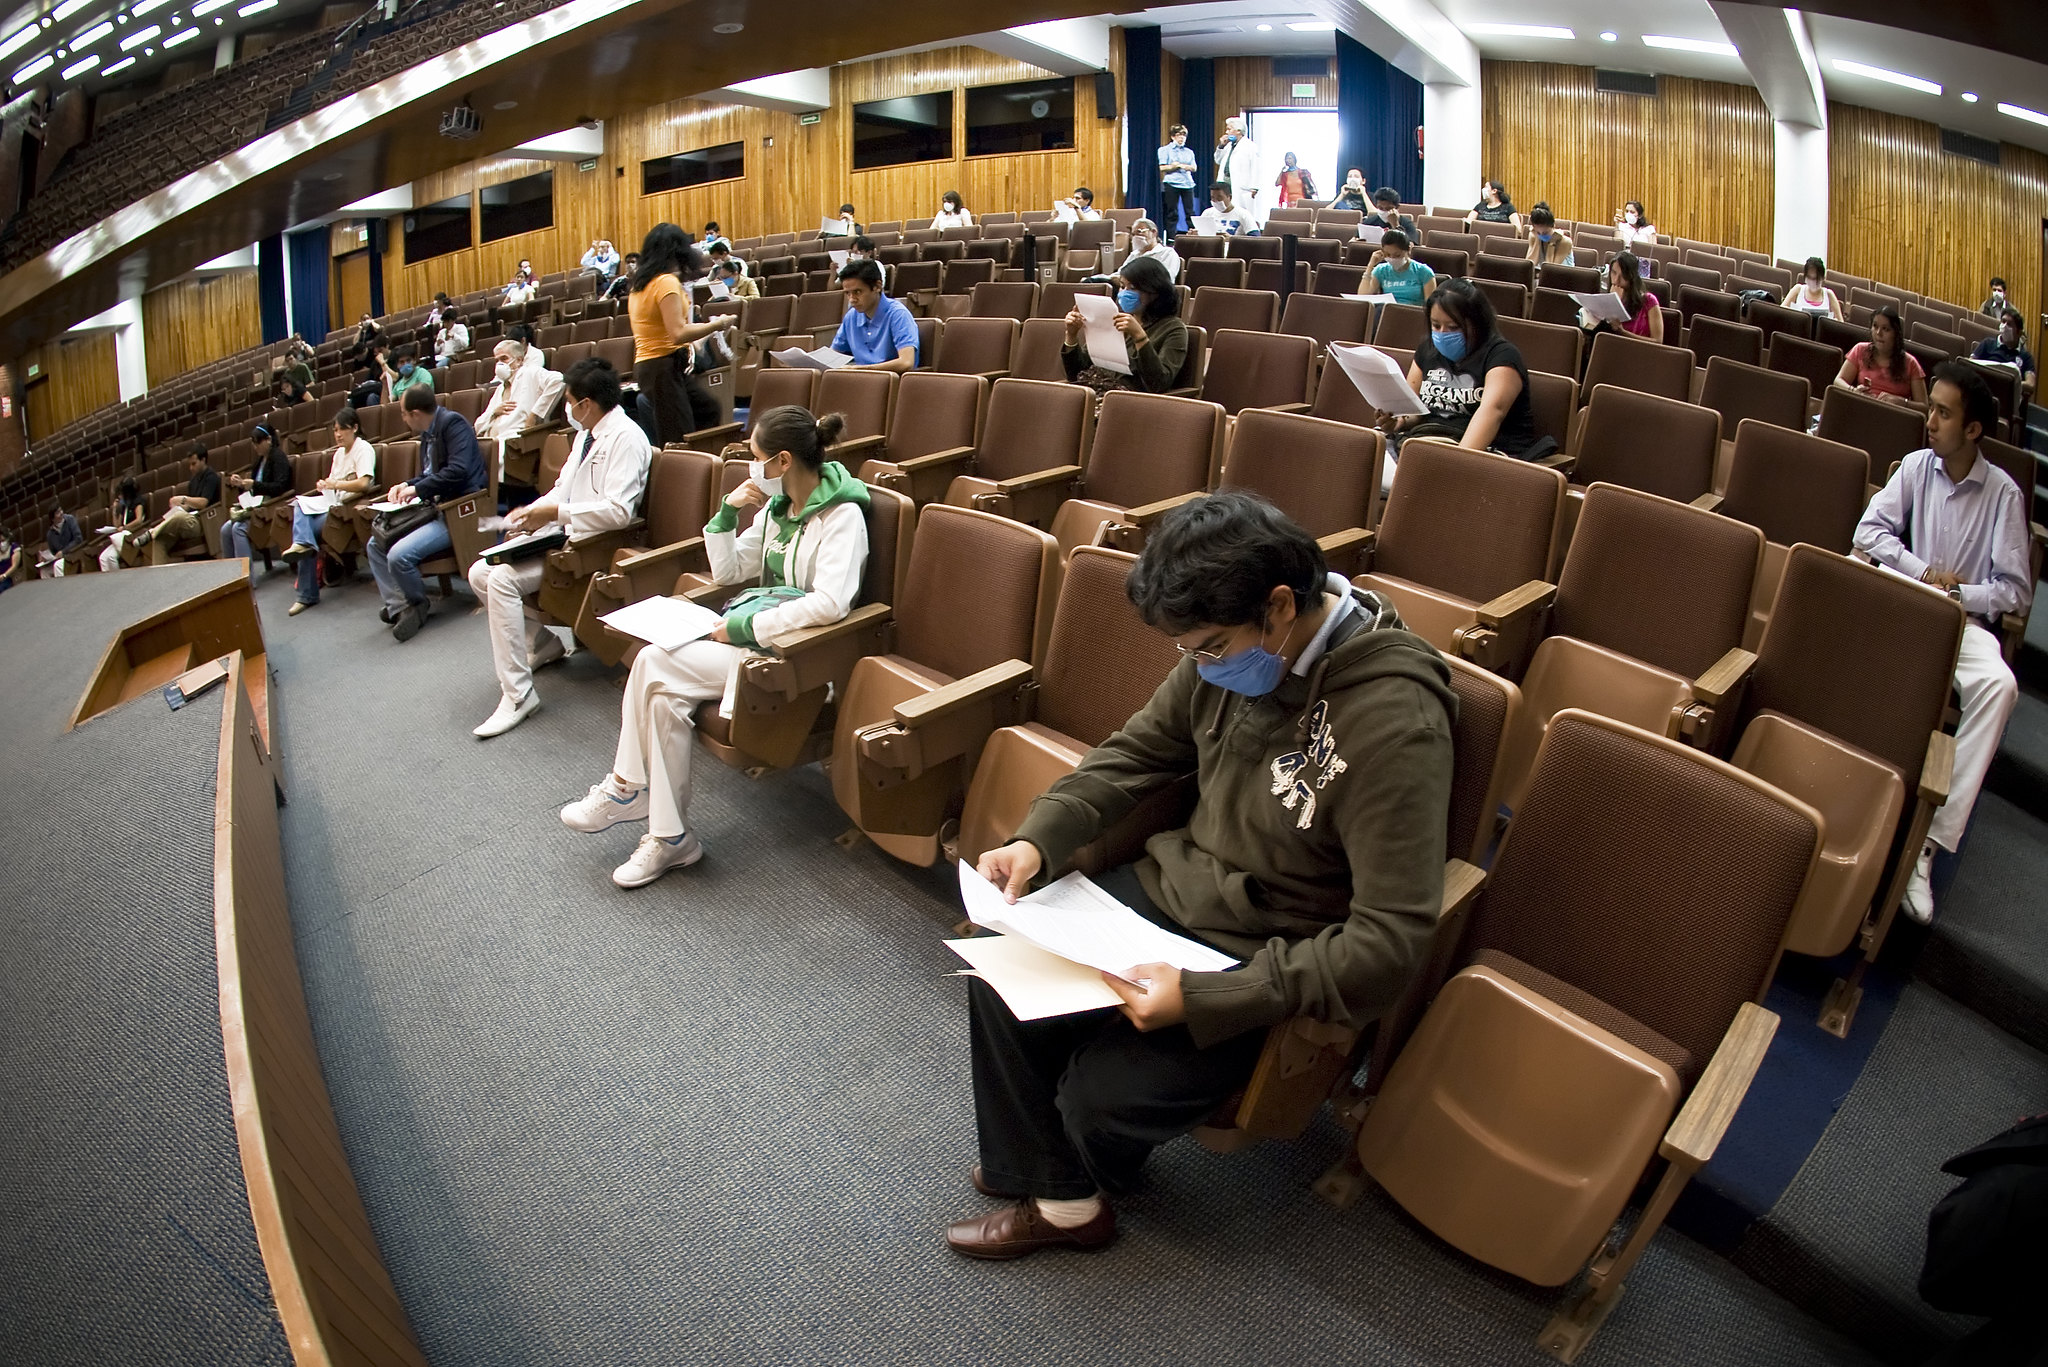 Students social distancing in a lecture theatre wearing face masks